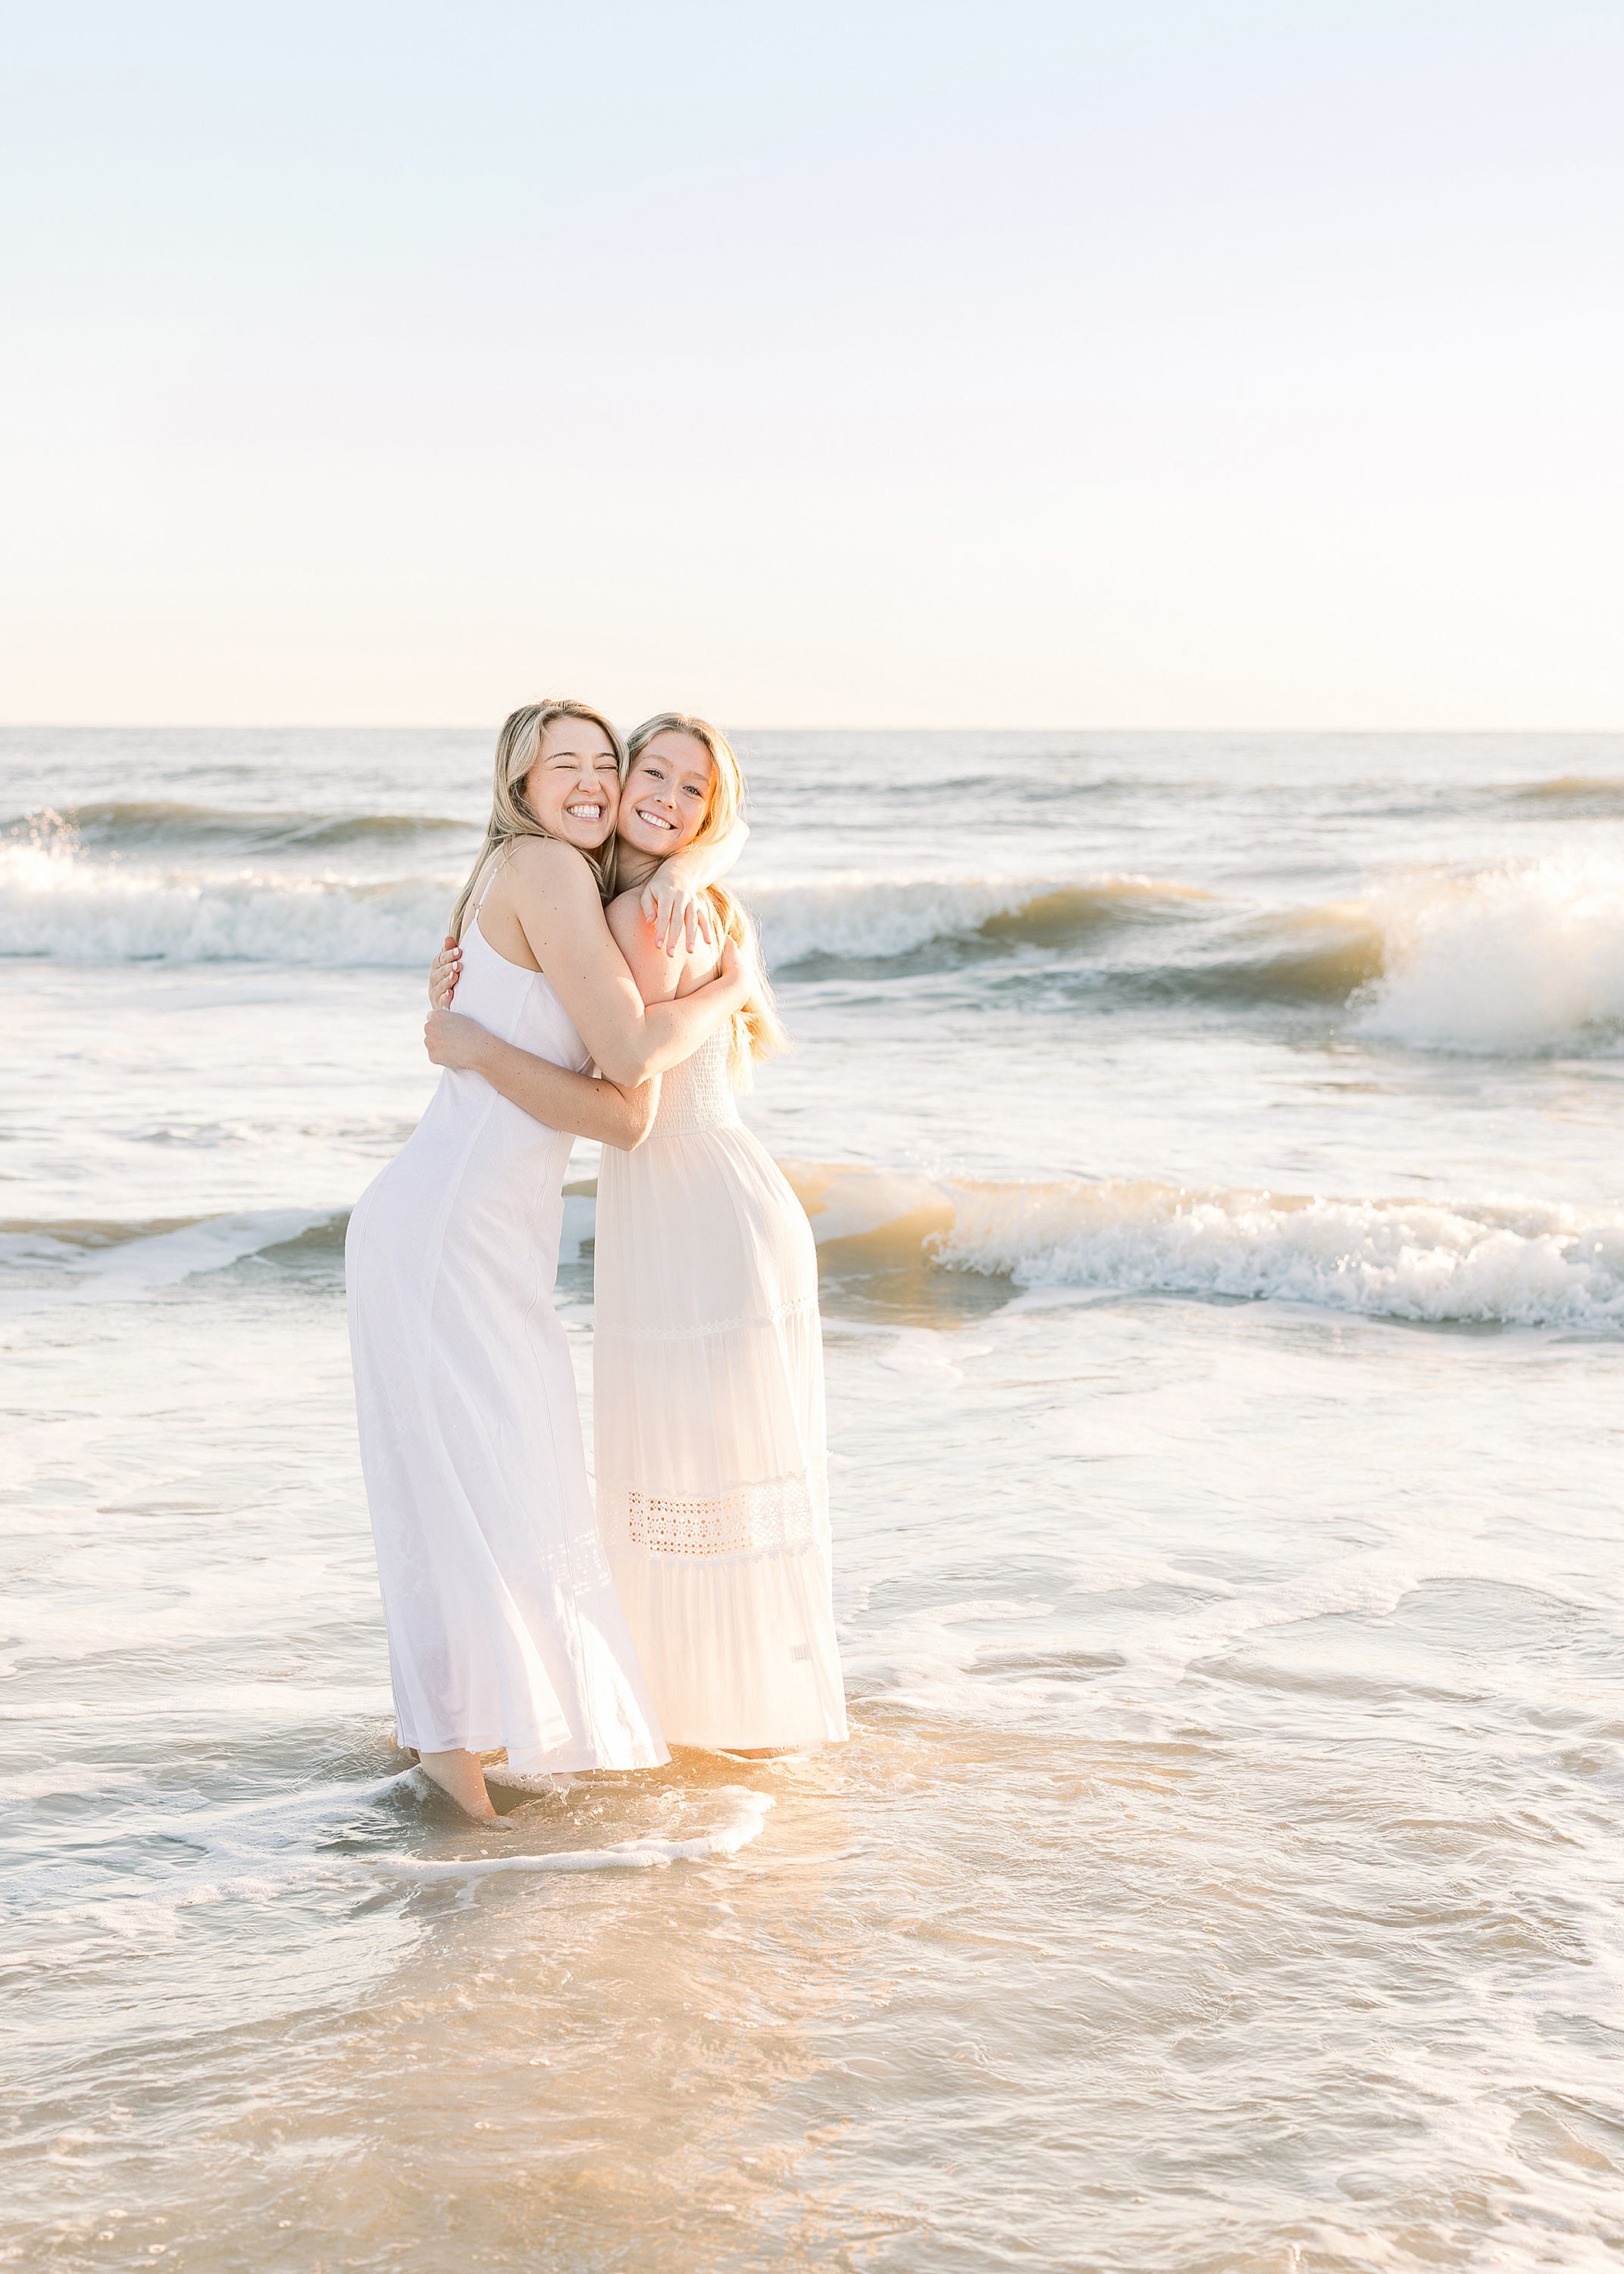 A sunrise beach portrait of two sisters hugging each other in the water.